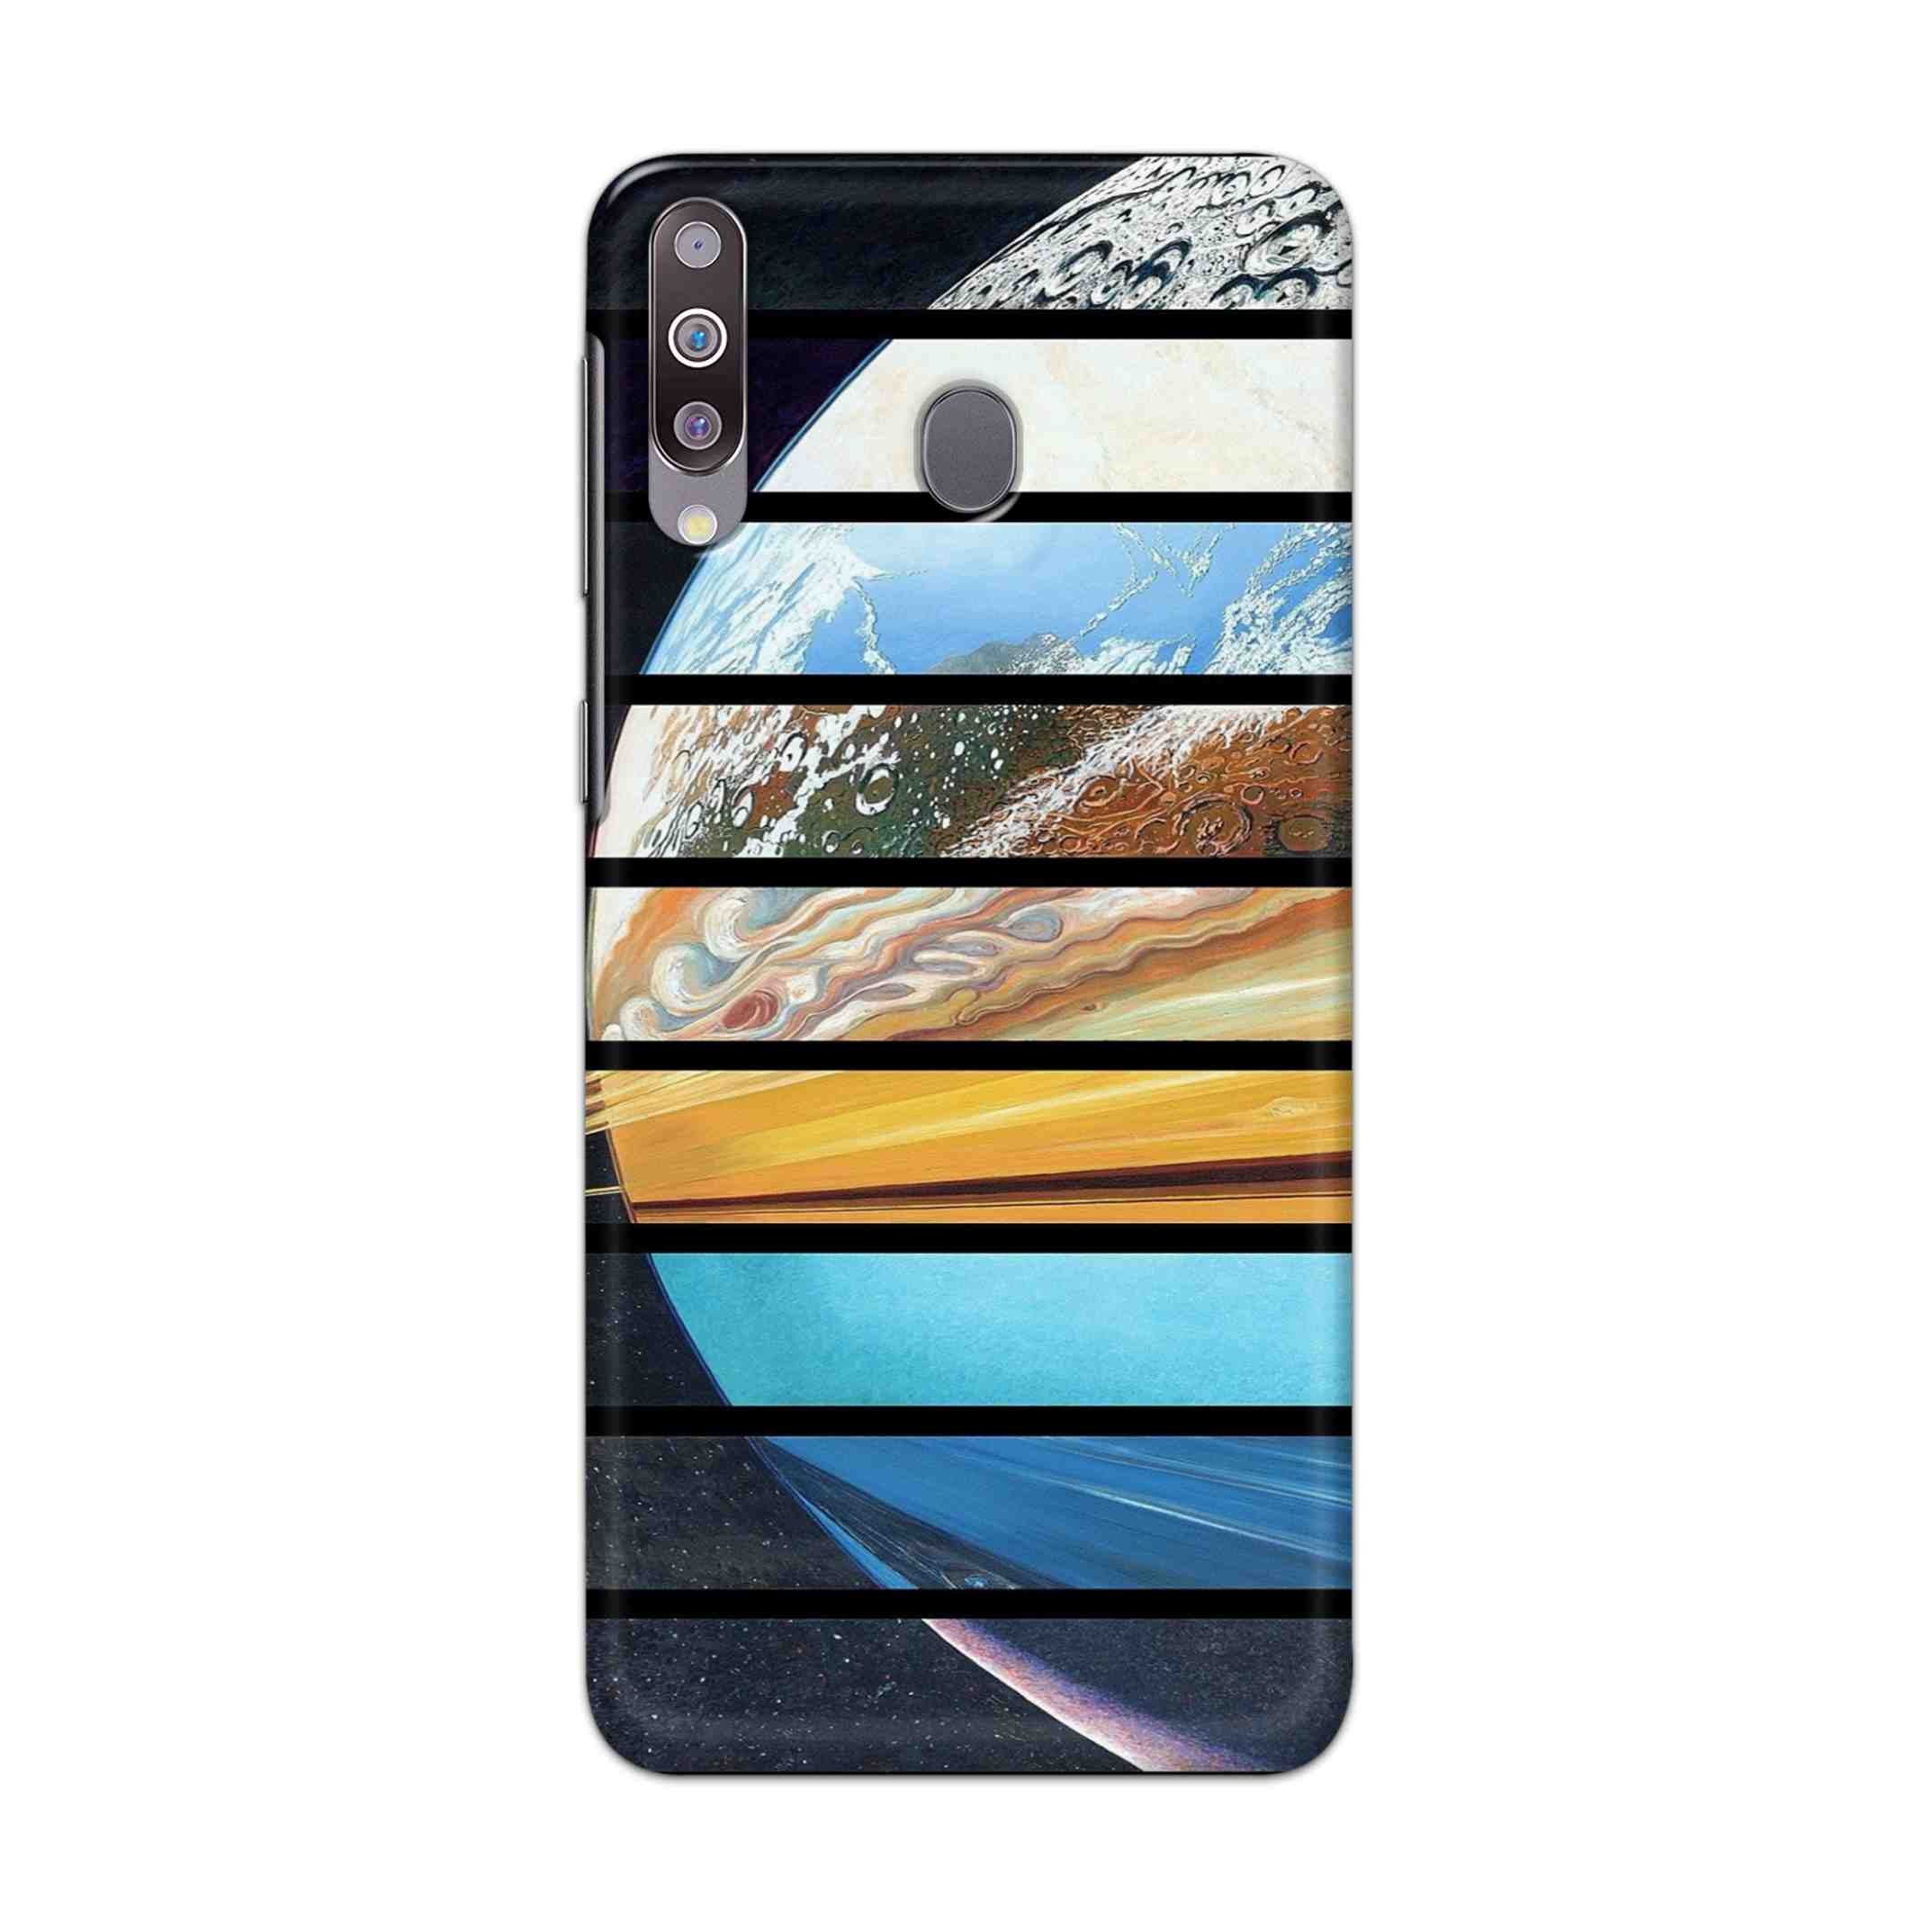 Buy Colourful Earth Hard Back Mobile Phone Case Cover For Samsung Galaxy M30 Online